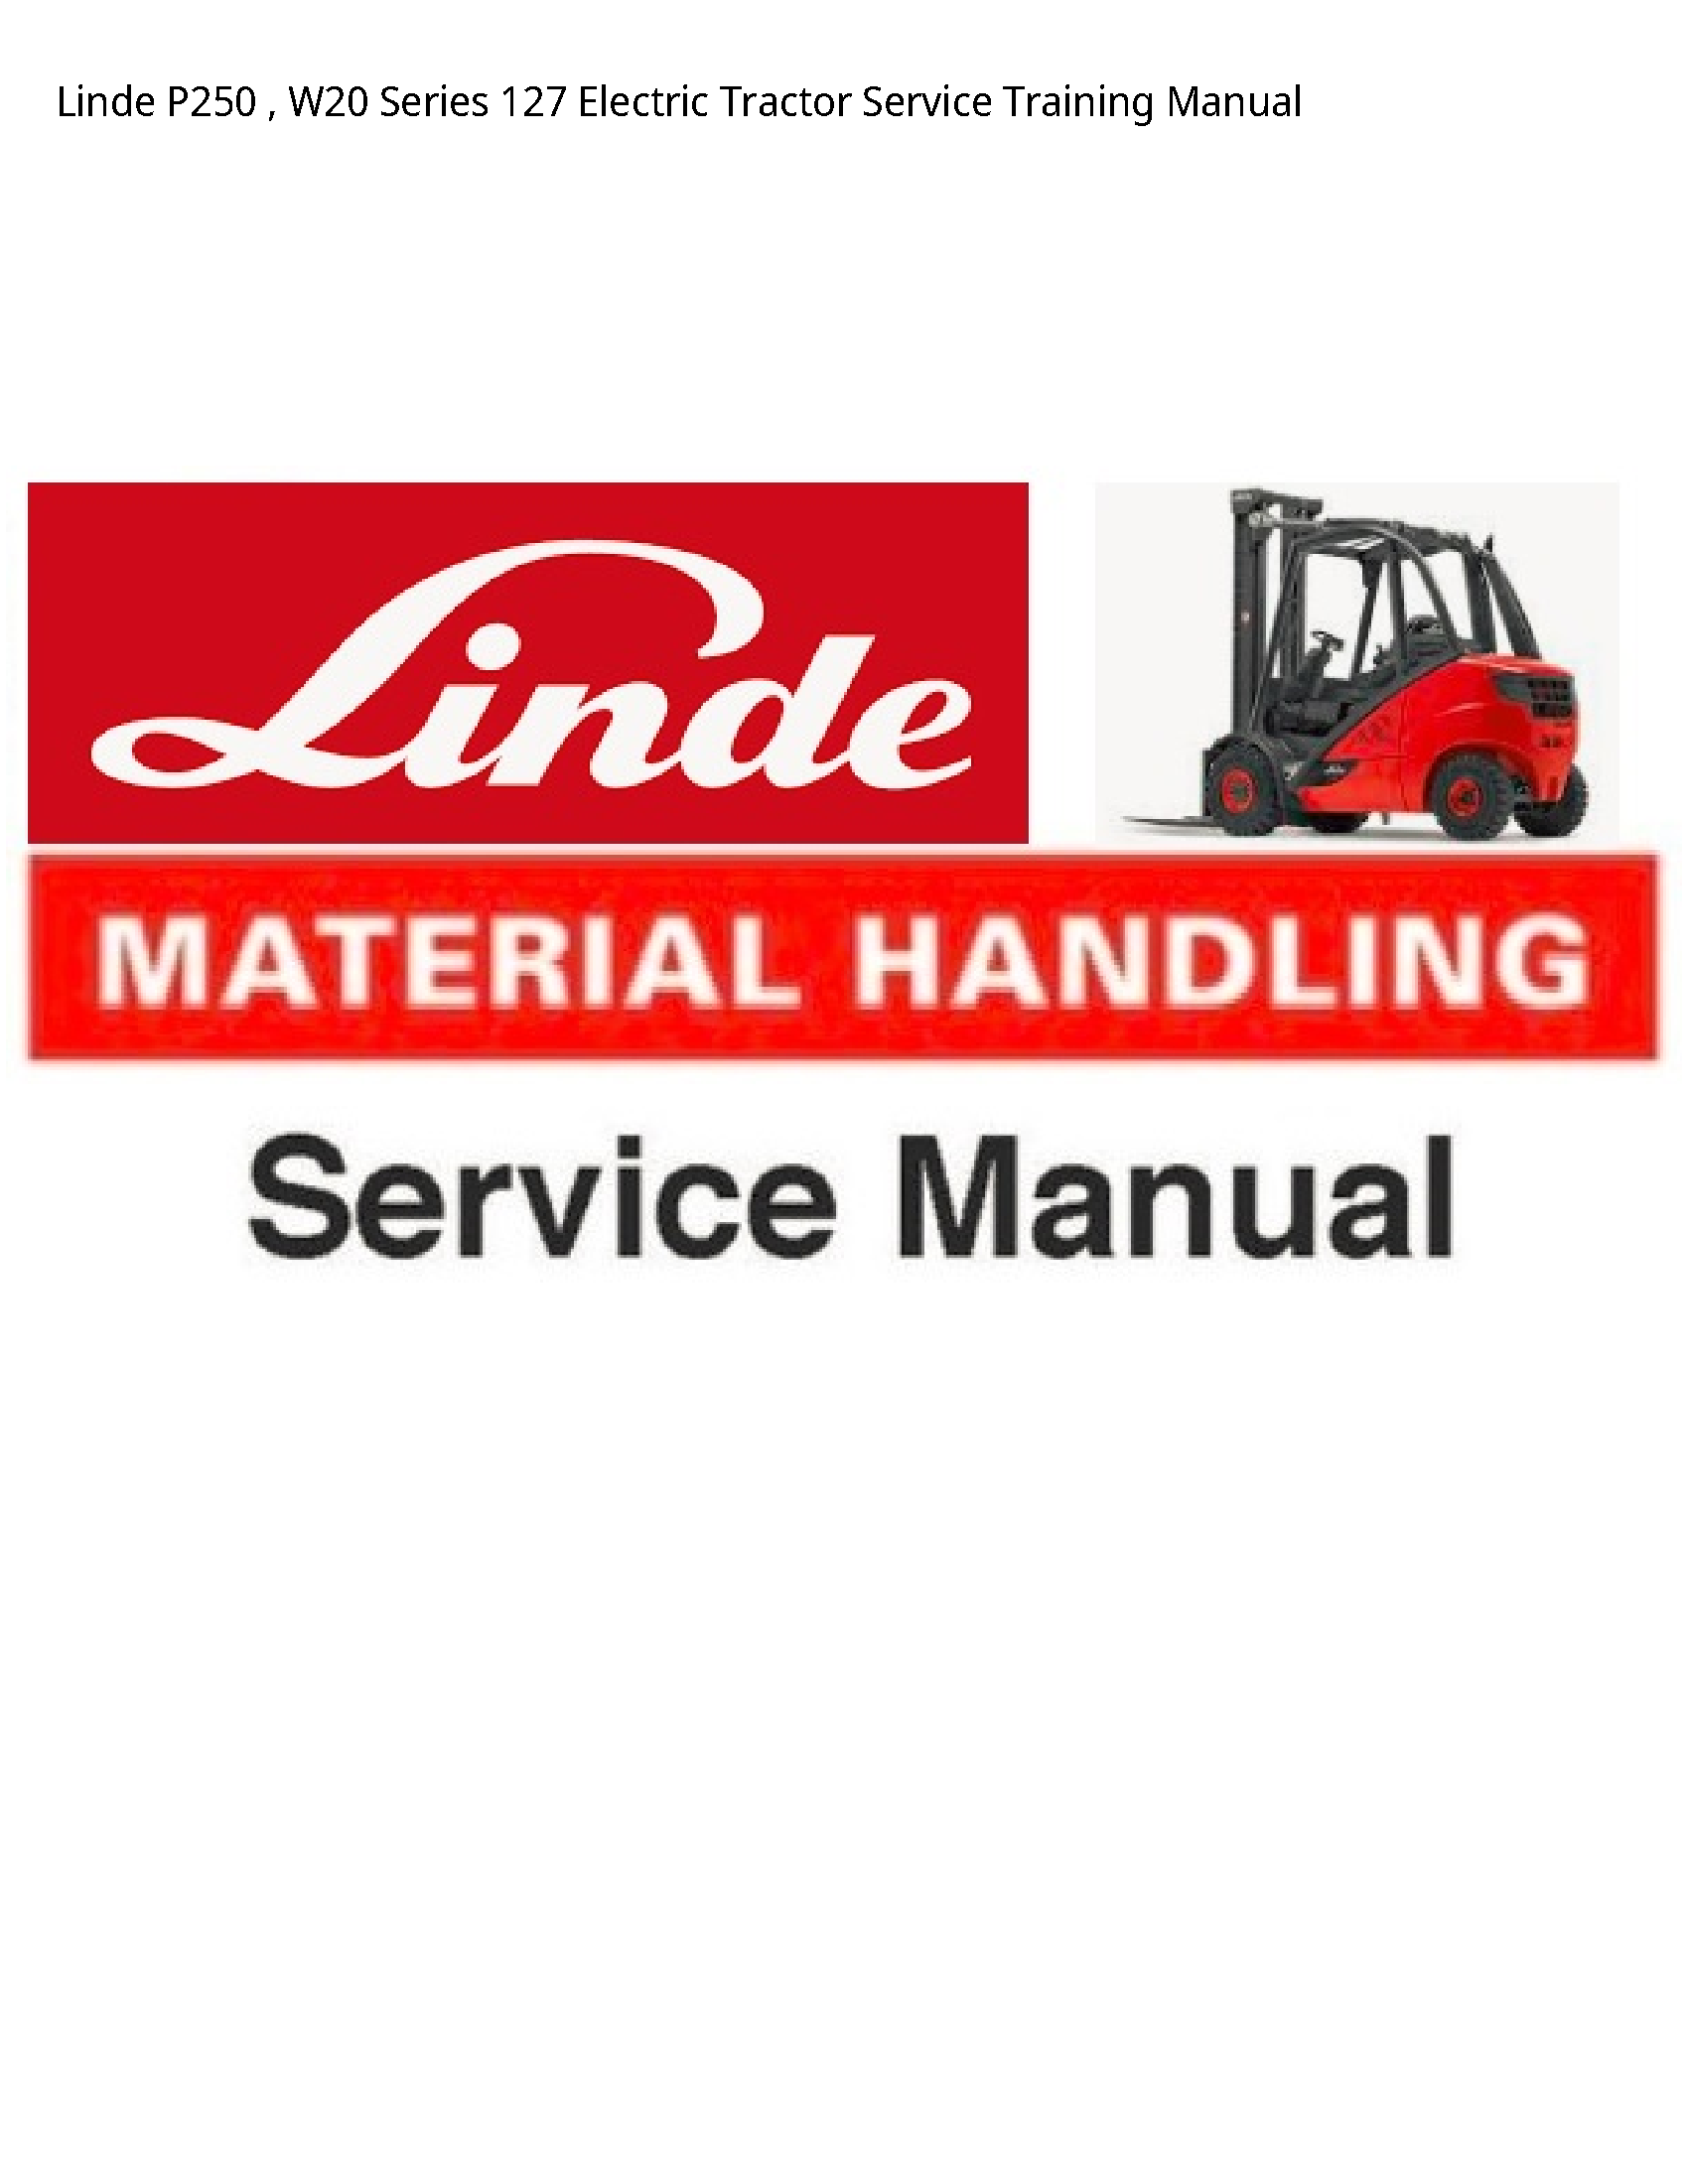 Linde P250 Series Electric Tractor Service Training manual